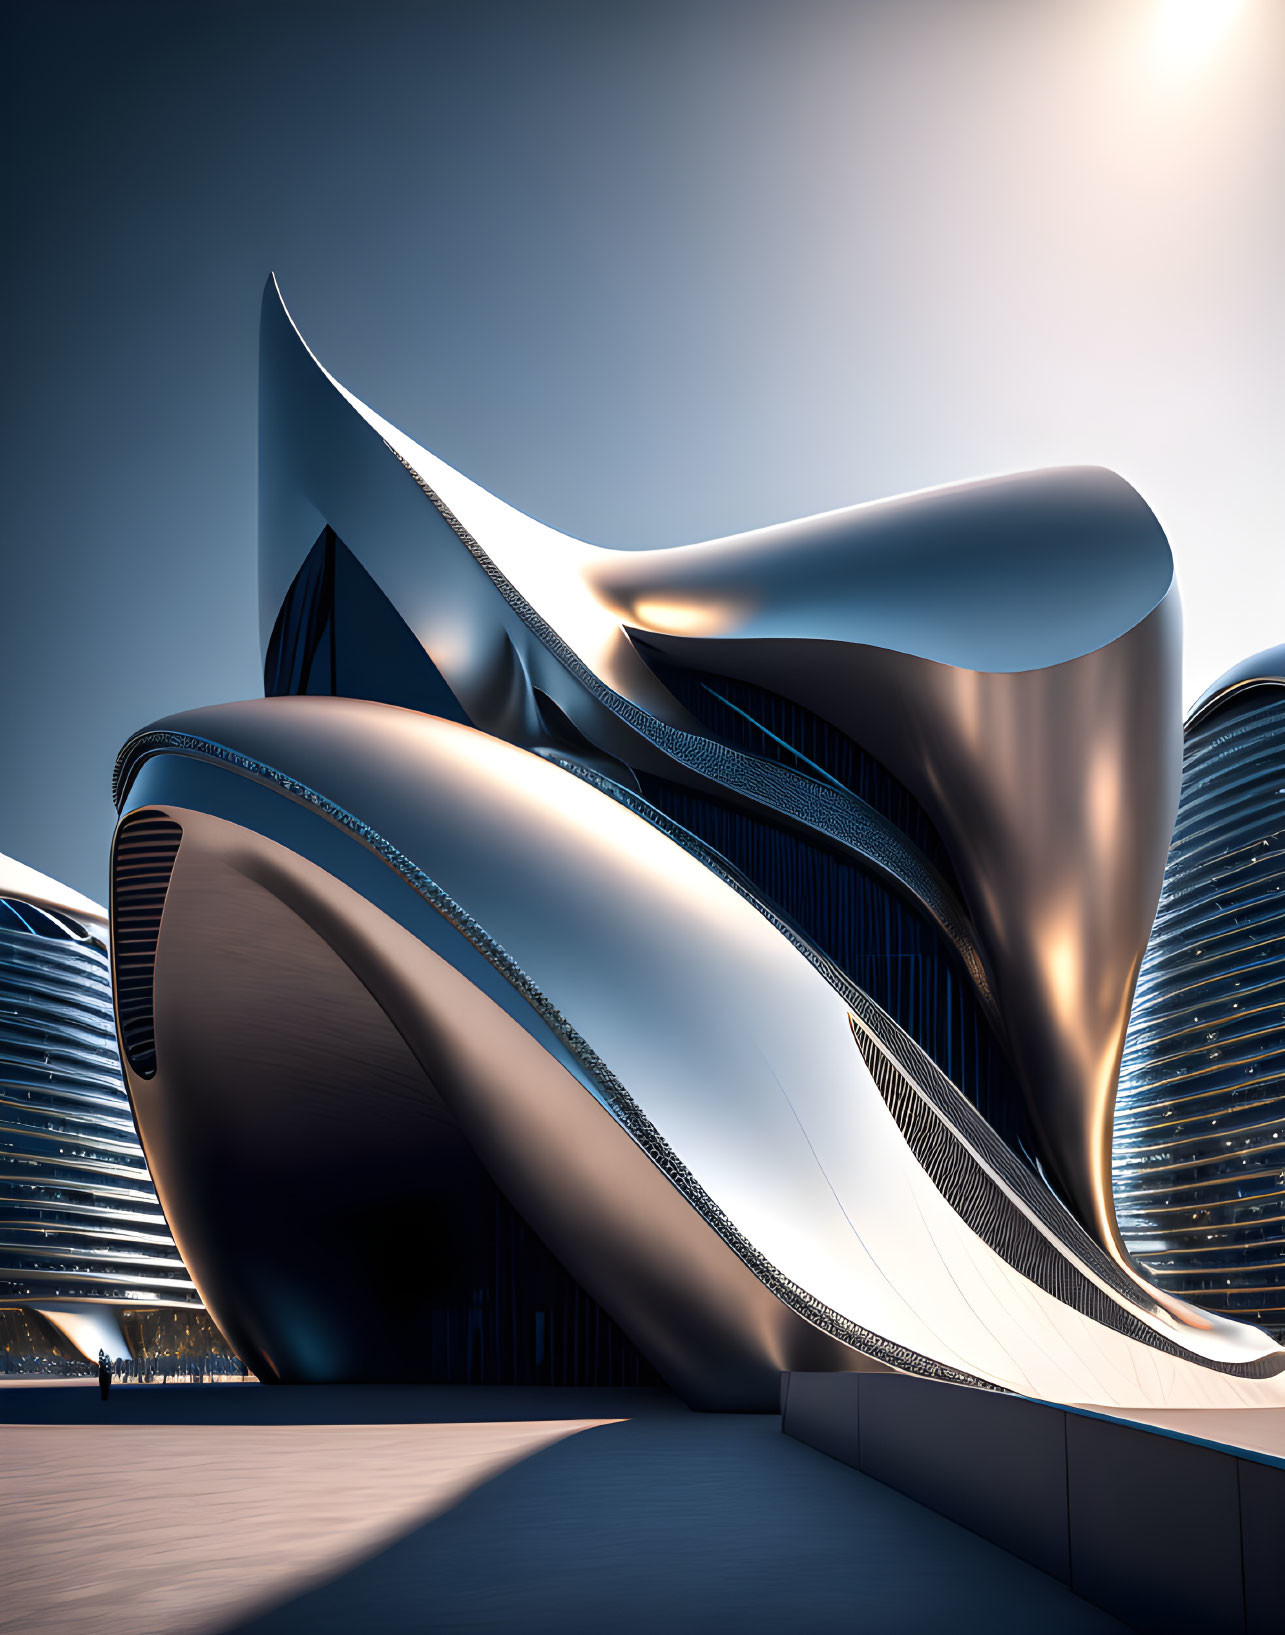 Modern urban architecture with futuristic design and metallic surfaces under blue sky